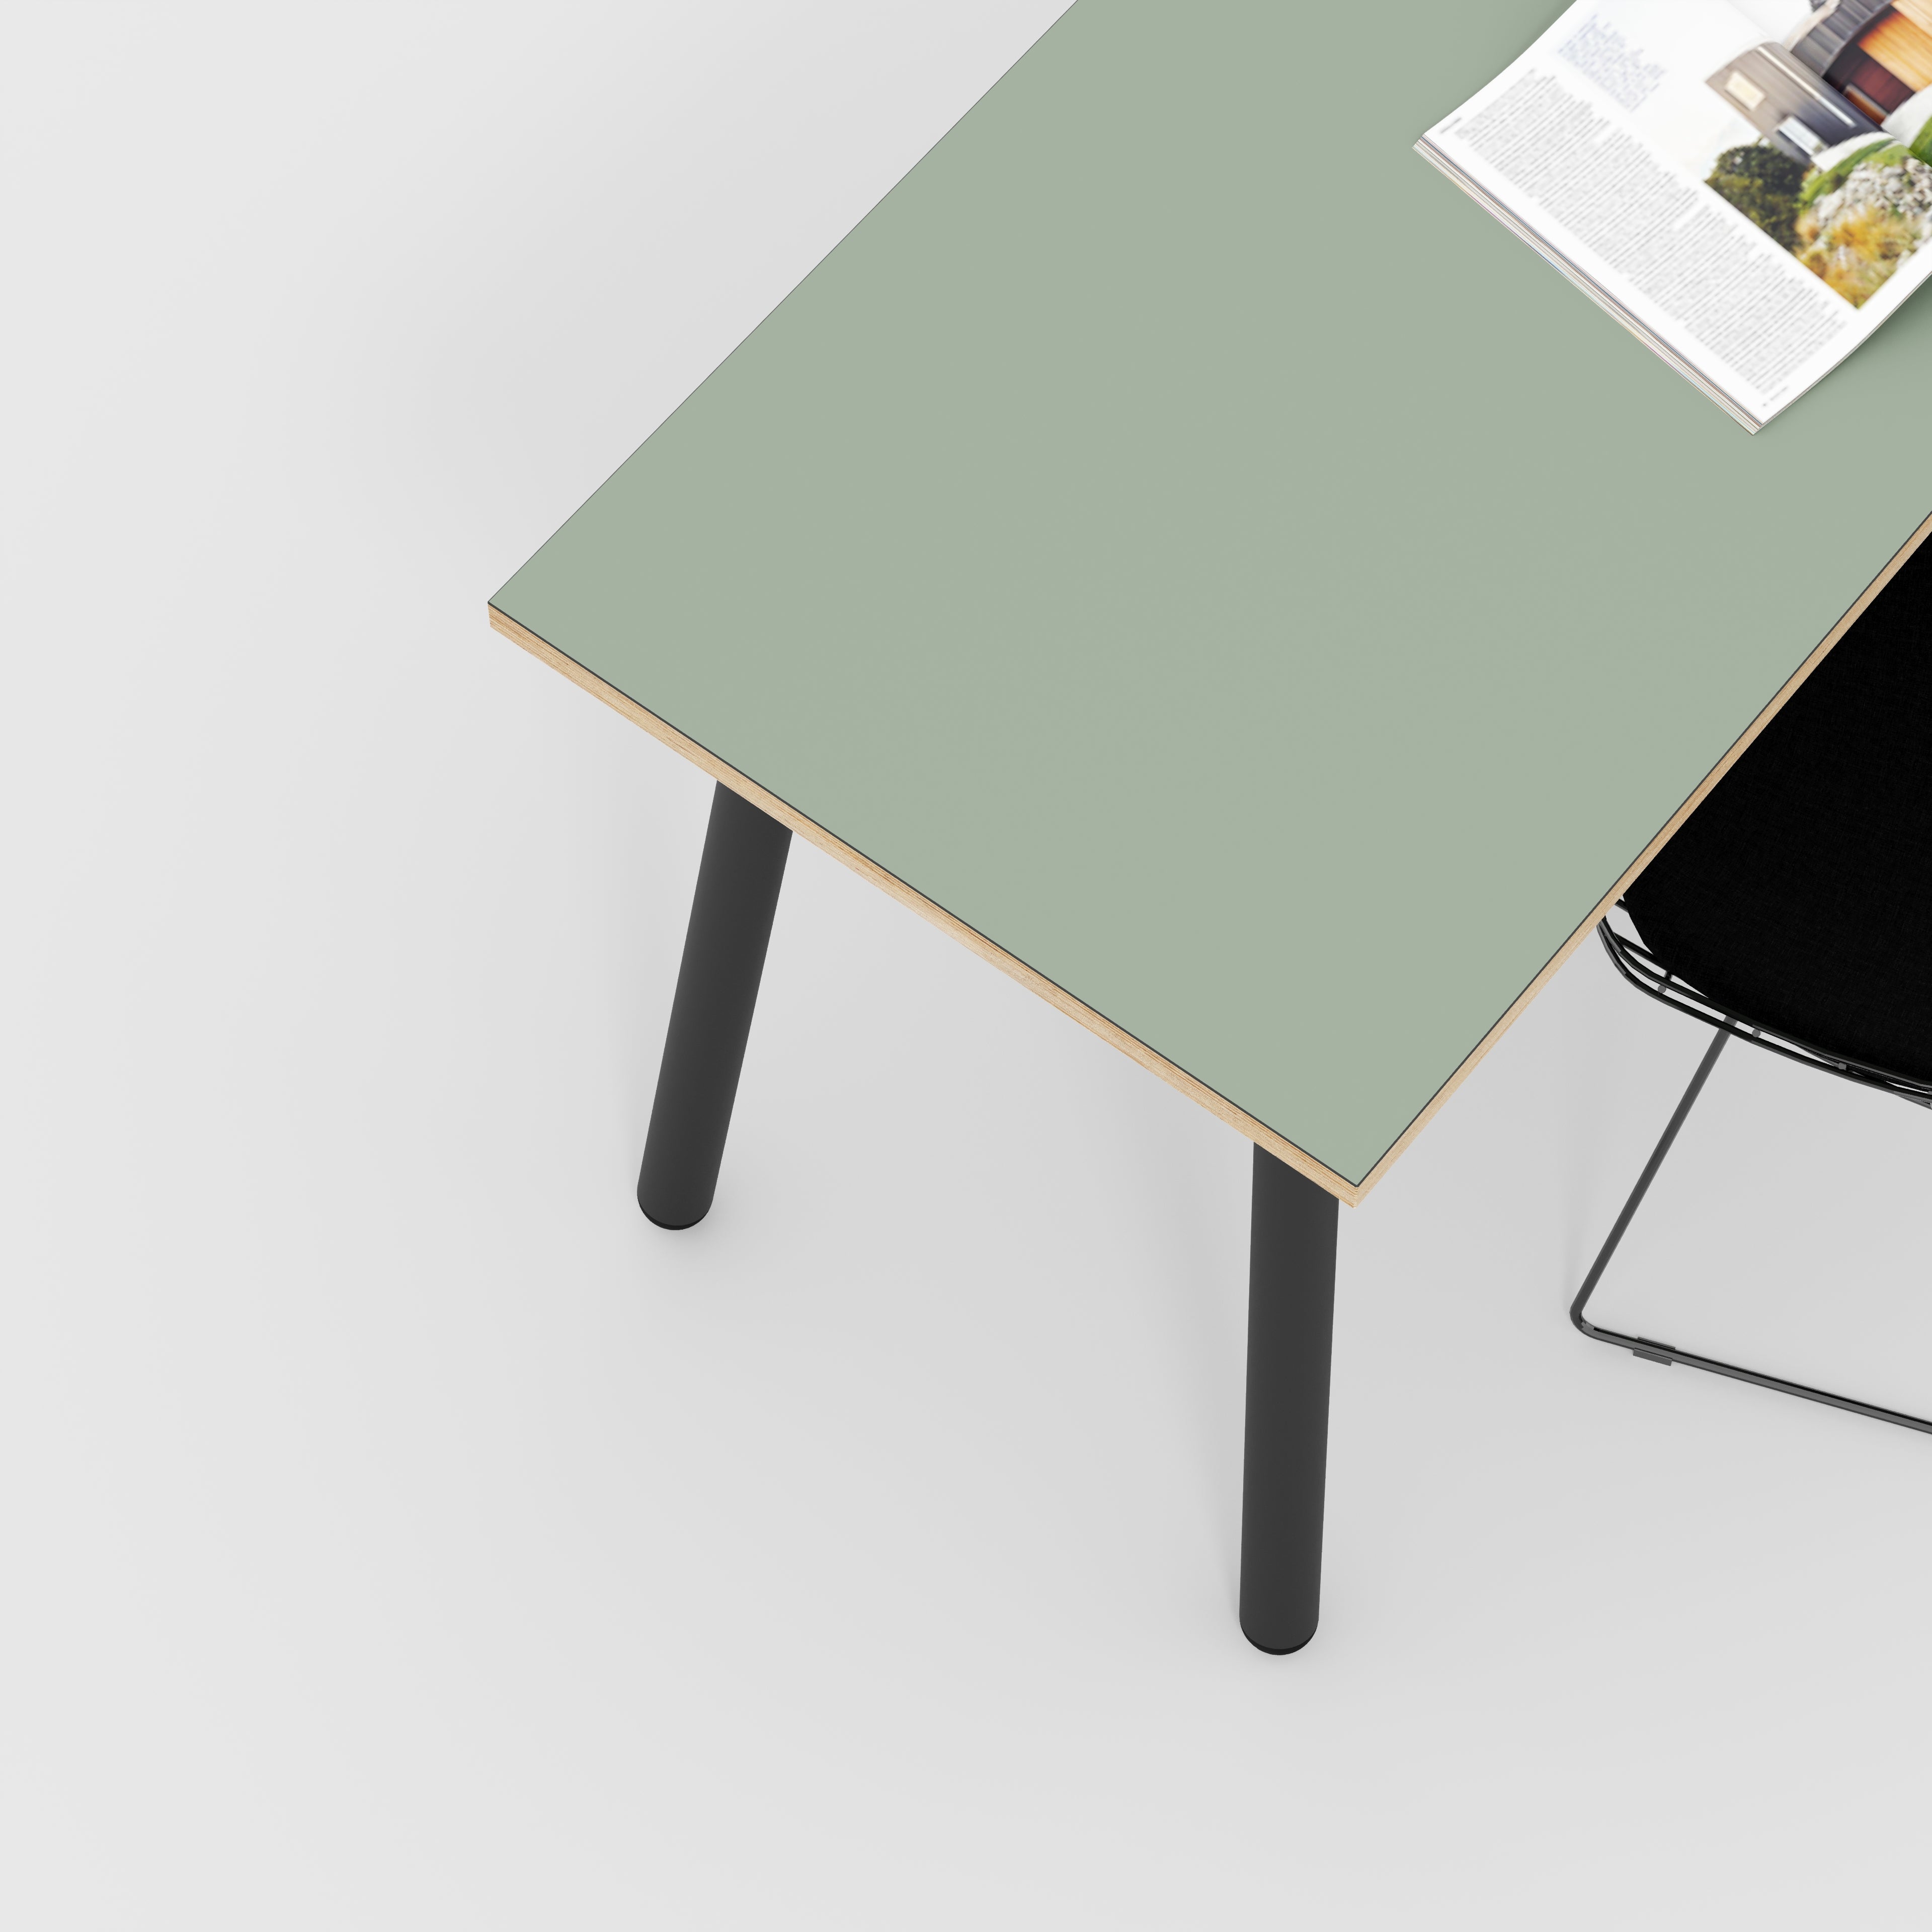 Desk with Black Round Single Pin Legs - Formica Green Slate - 1600(w) x 800(d) x 735(h)